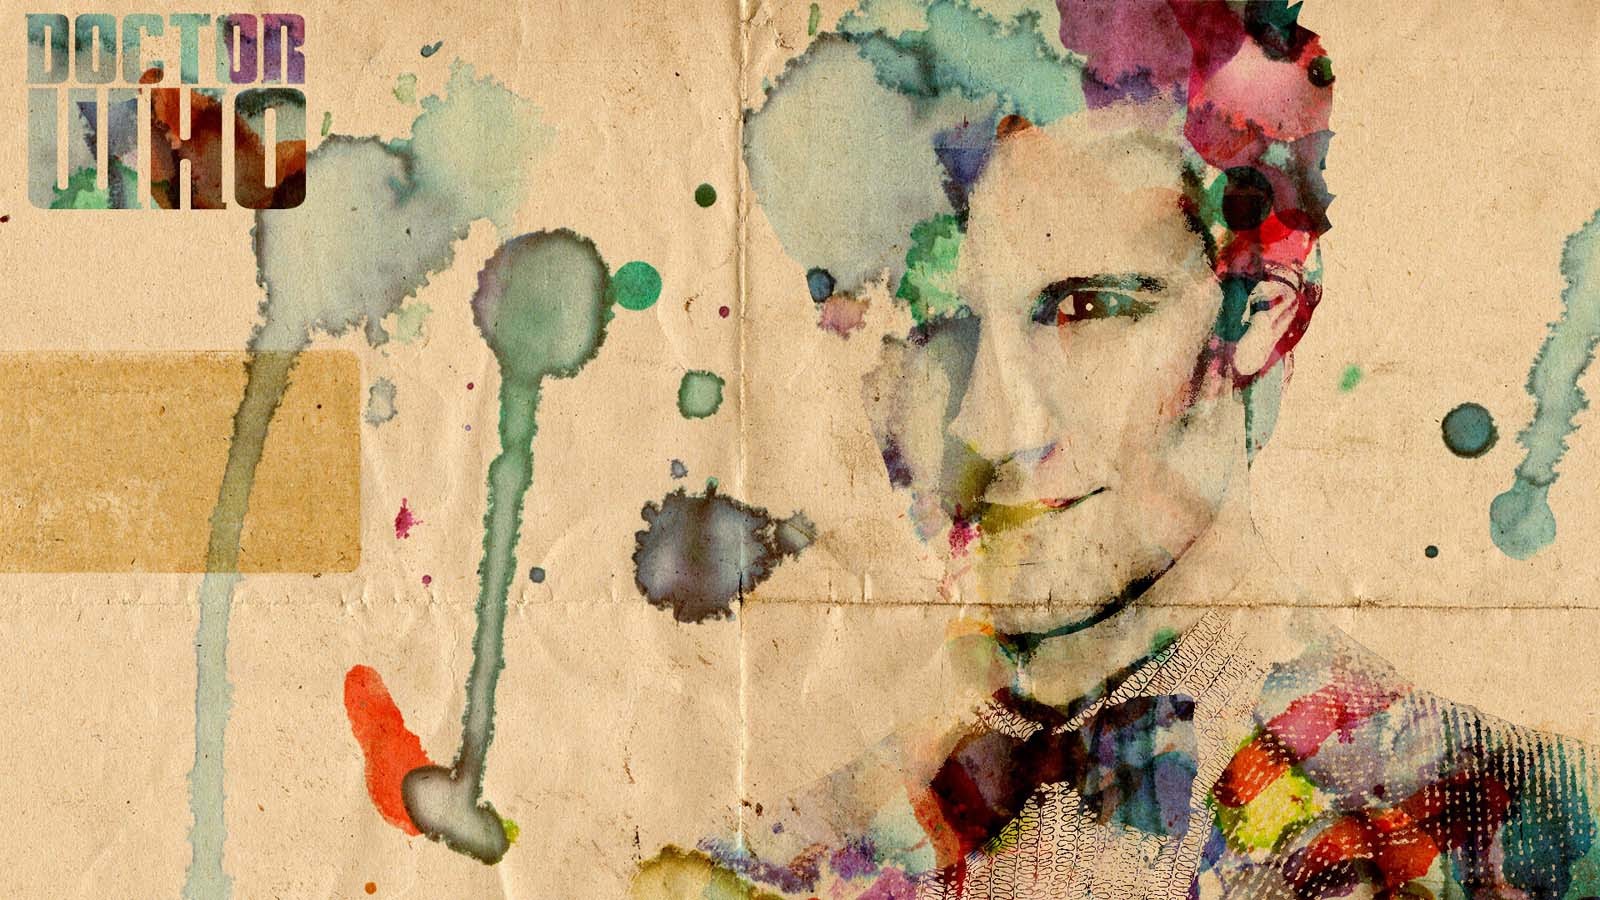 General 1600x900 Doctor Who Eleventh Doctor paint splatter watercolor beige TV series science fiction